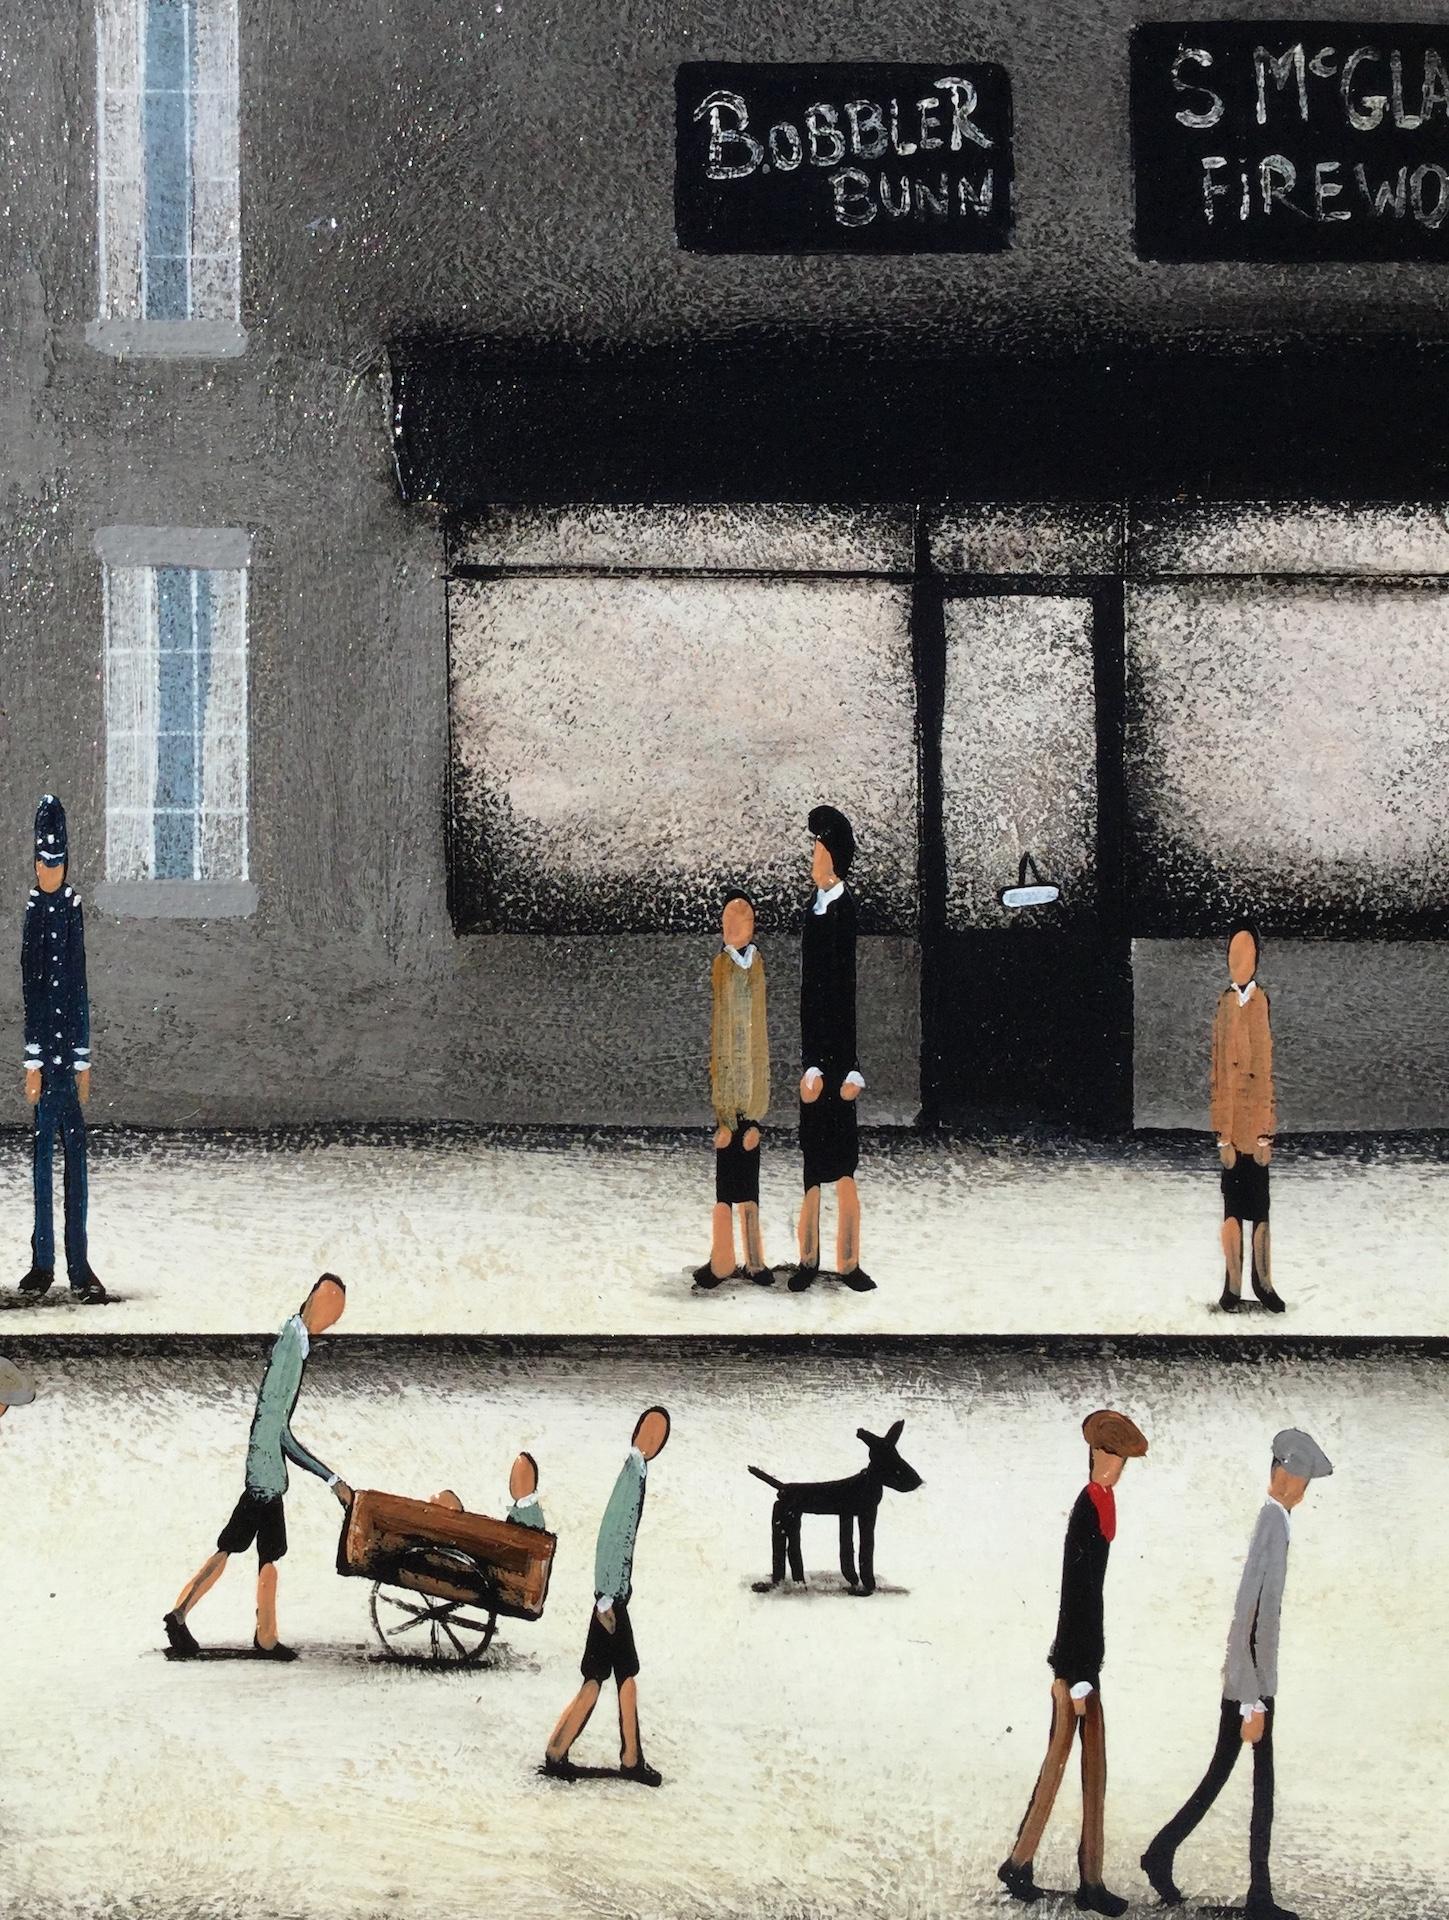 Sean Durkin, Bustling High Street, Contemporary Lowry -esque Figurative Painting 2